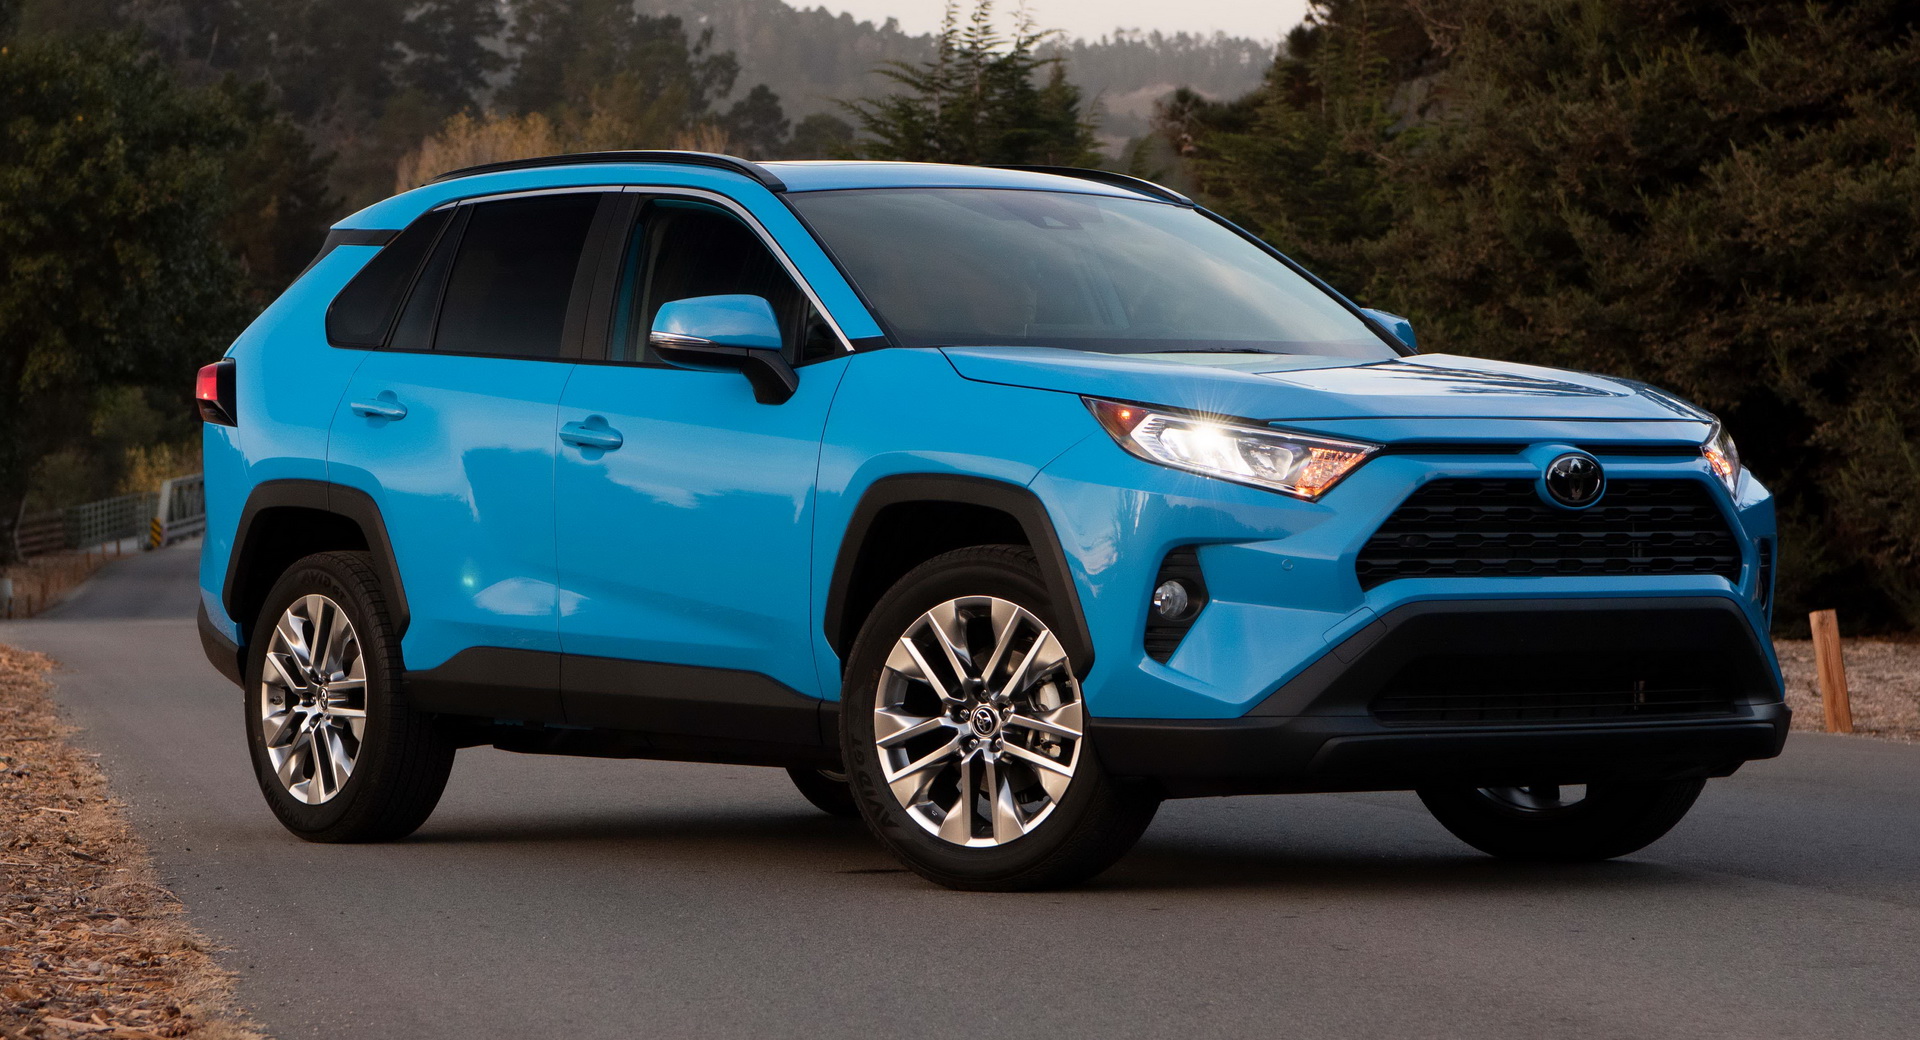 2019 Toyota RAV4 Starts From 26,545 All The Details On Prices, Grades